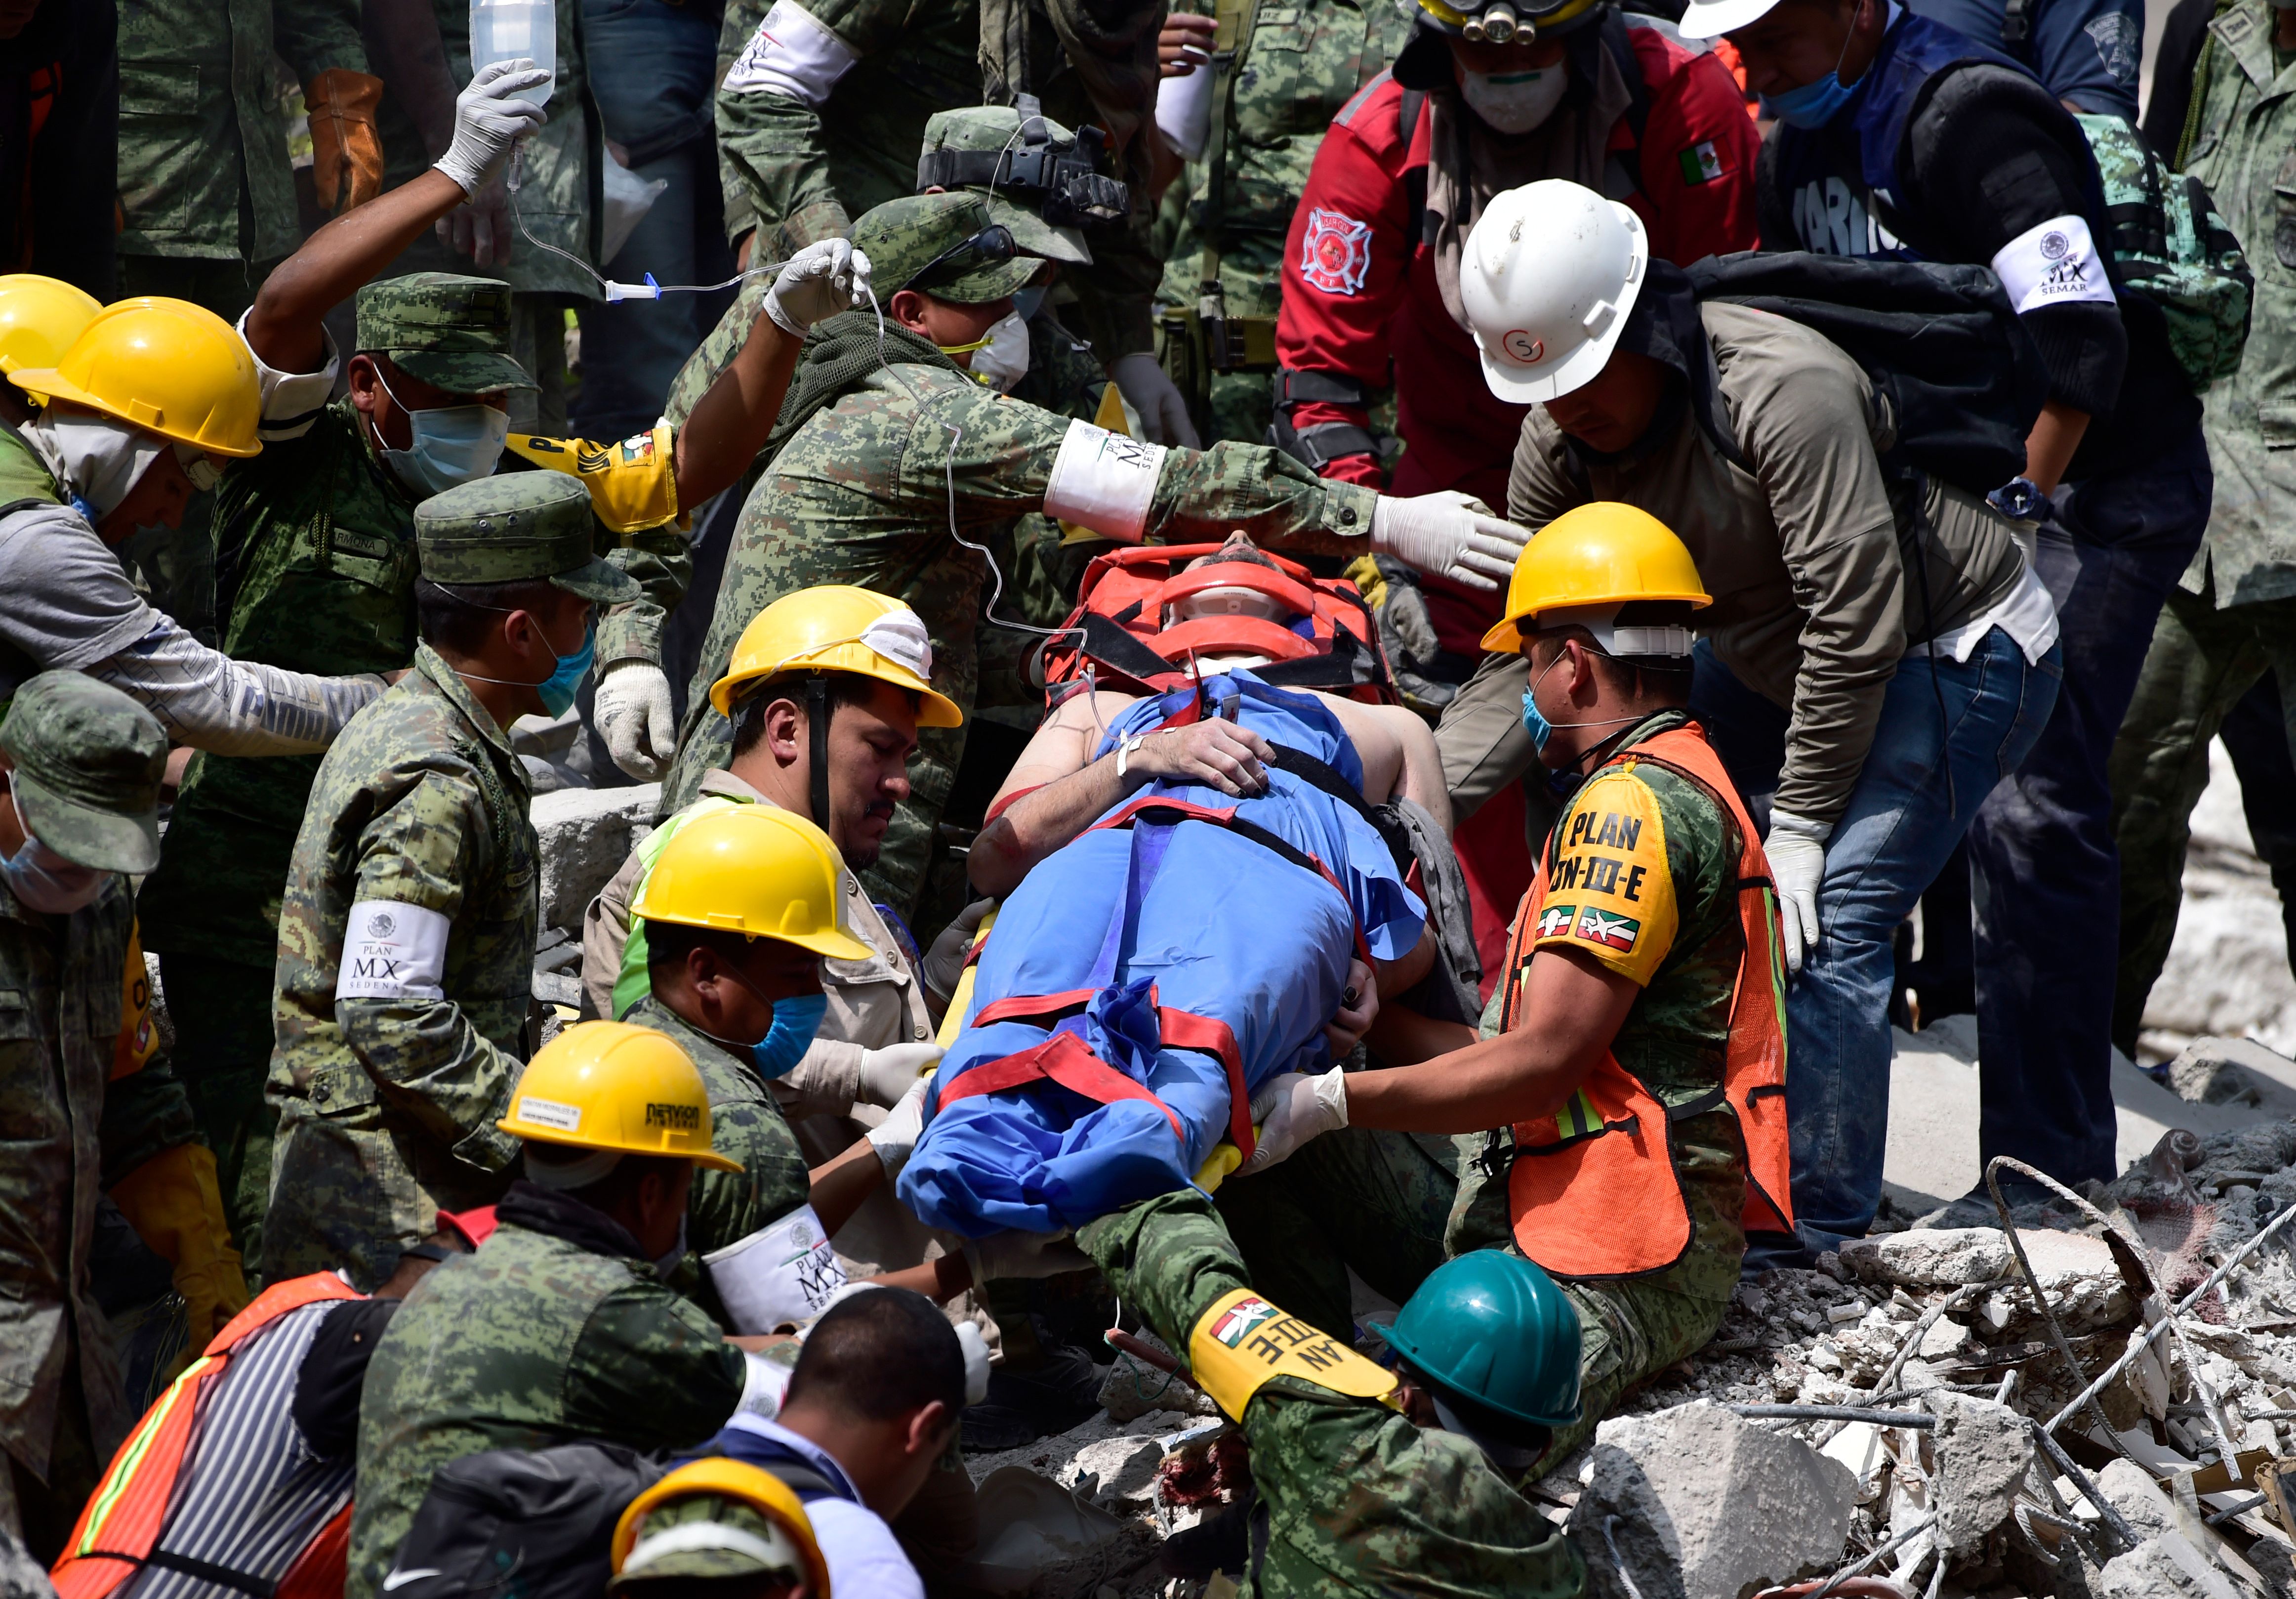 A survivor is pulled out of the rubble from a flattened building in Mexico City on September 20, 2017 as the search for survivors continues a day after a strong quake hit central Mexico. A powerful 7.1 earthquake shook Mexico City on Tuesday, causing panic among the megalopolis' 20 million inhabitants on the 32nd anniversary of a devastating 1985 quake. / AFP PHOTO / Pedro PARDO (Photo credit should read PEDRO PARDO/AFP/Getty Images)